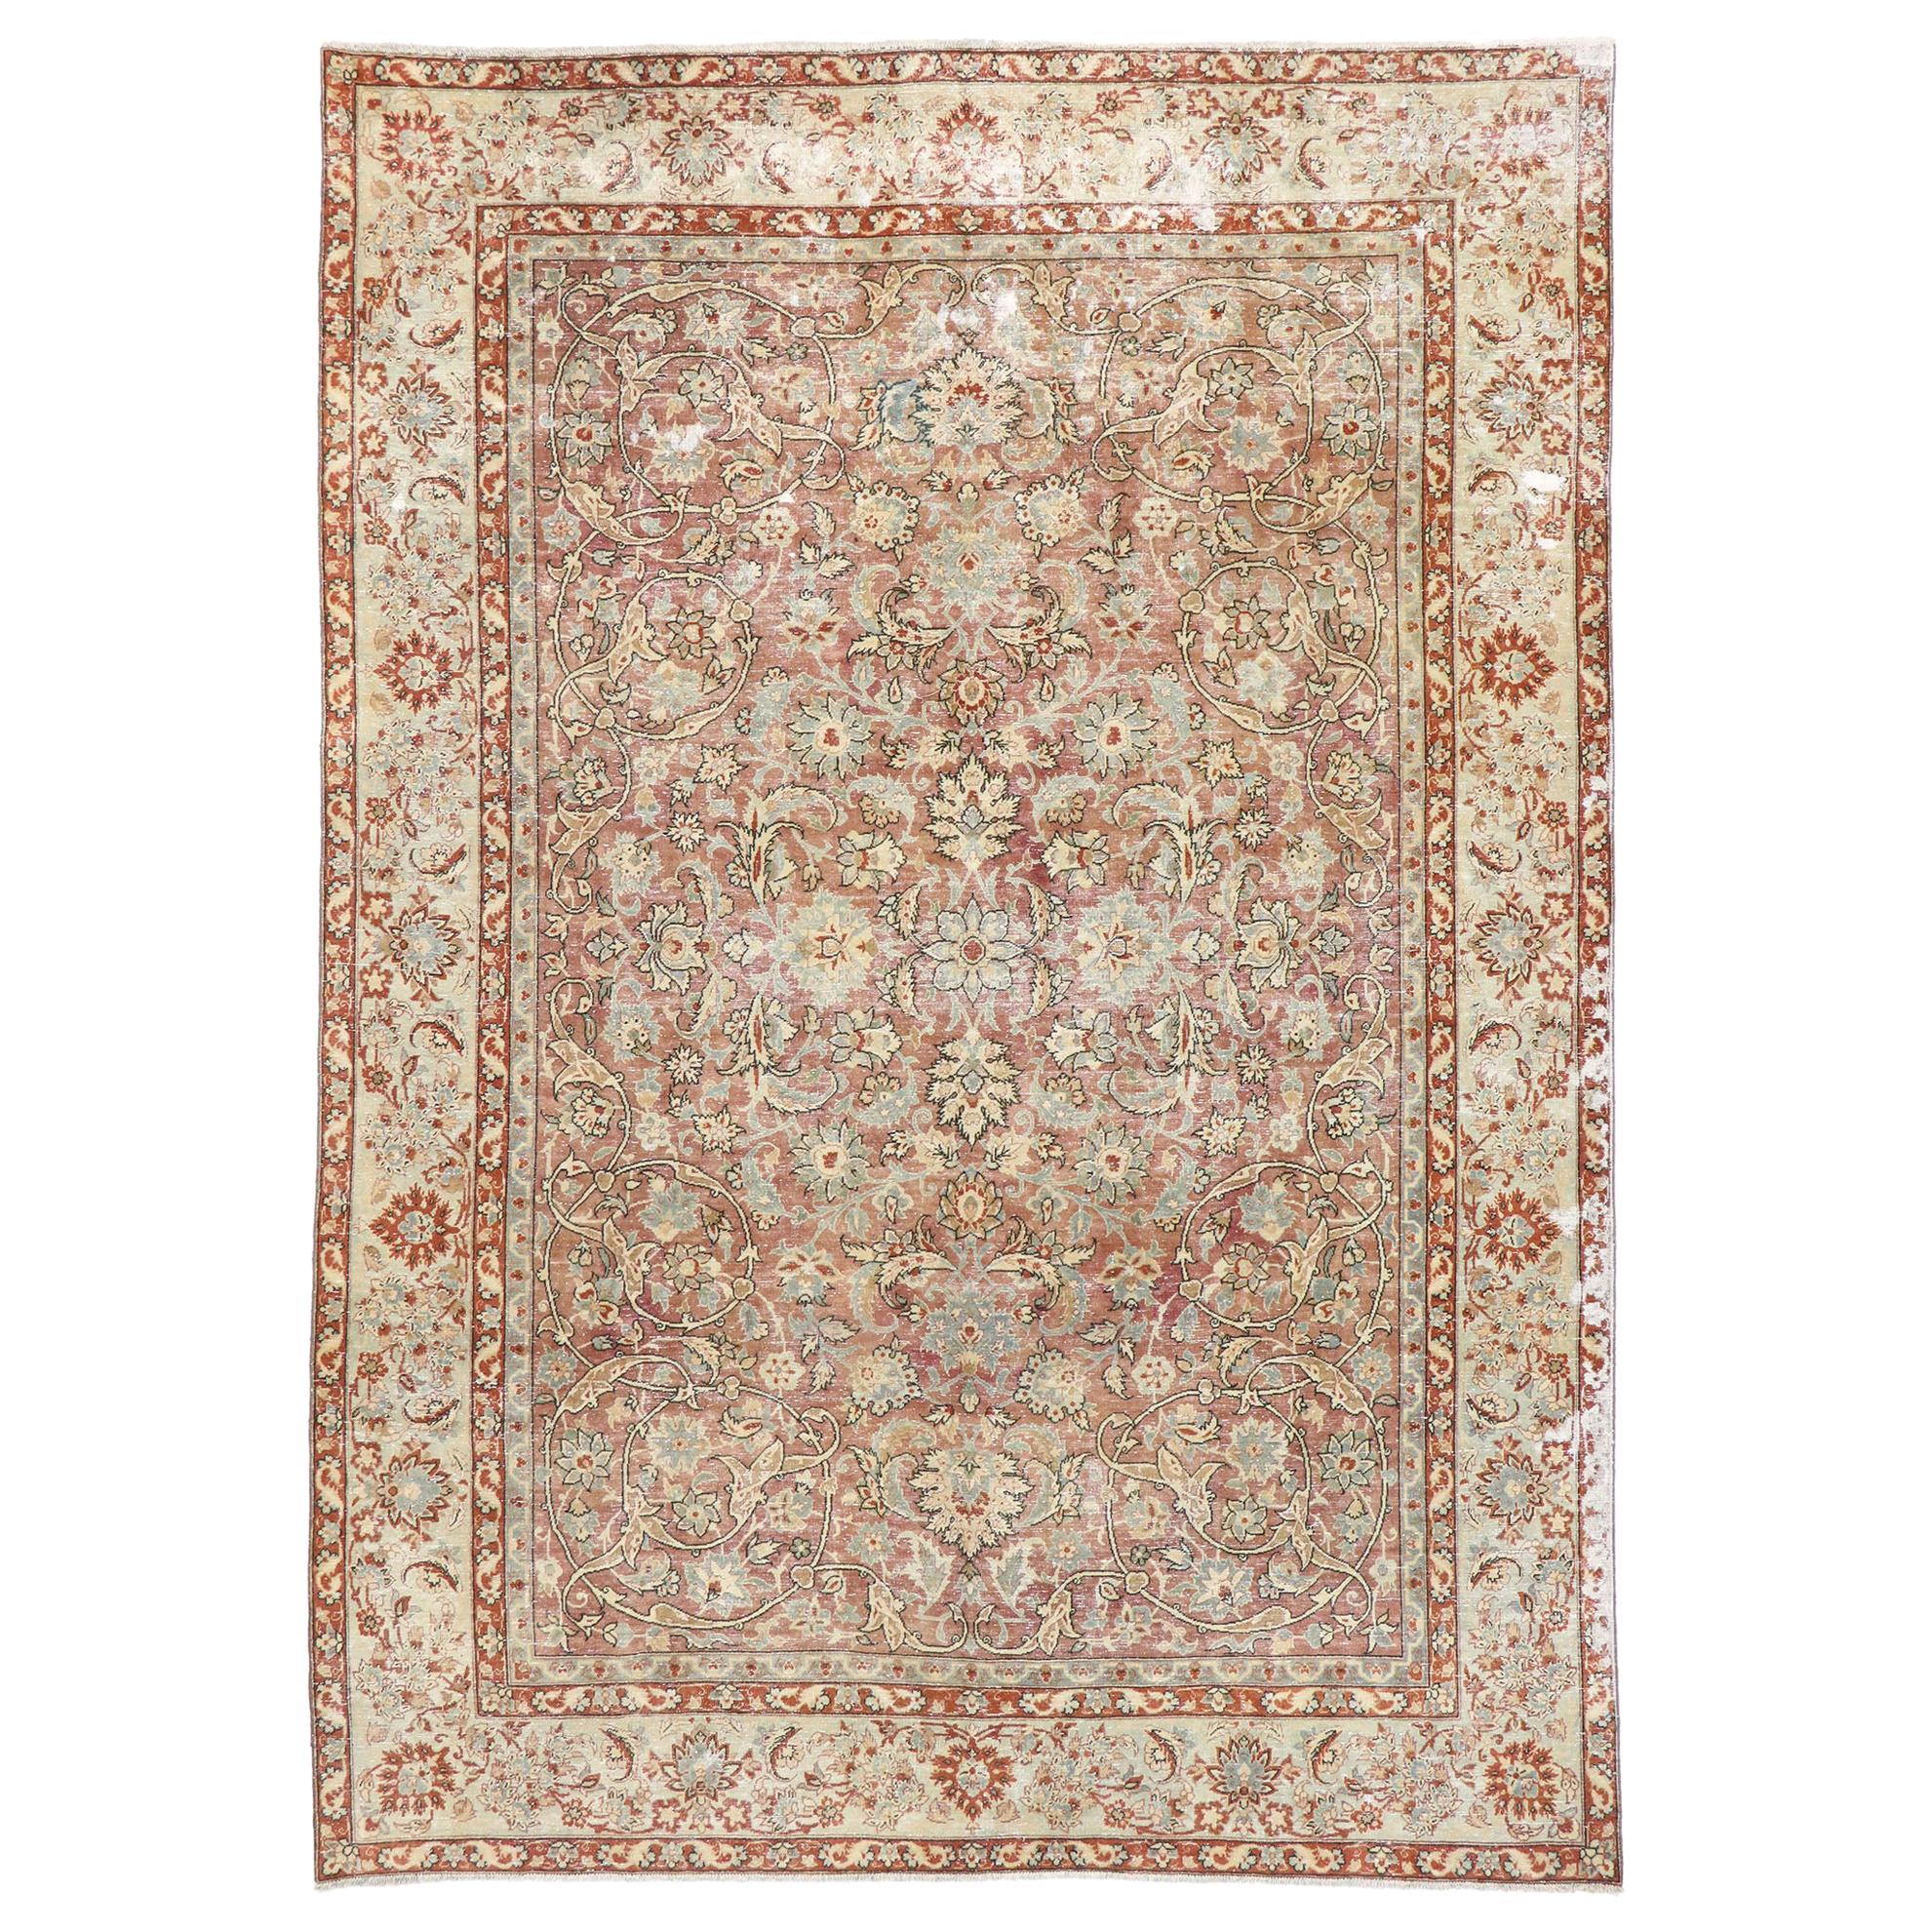 Distressed Antique Persian Tabriz Rug with Rustic Italian Tuscan Style For Sale